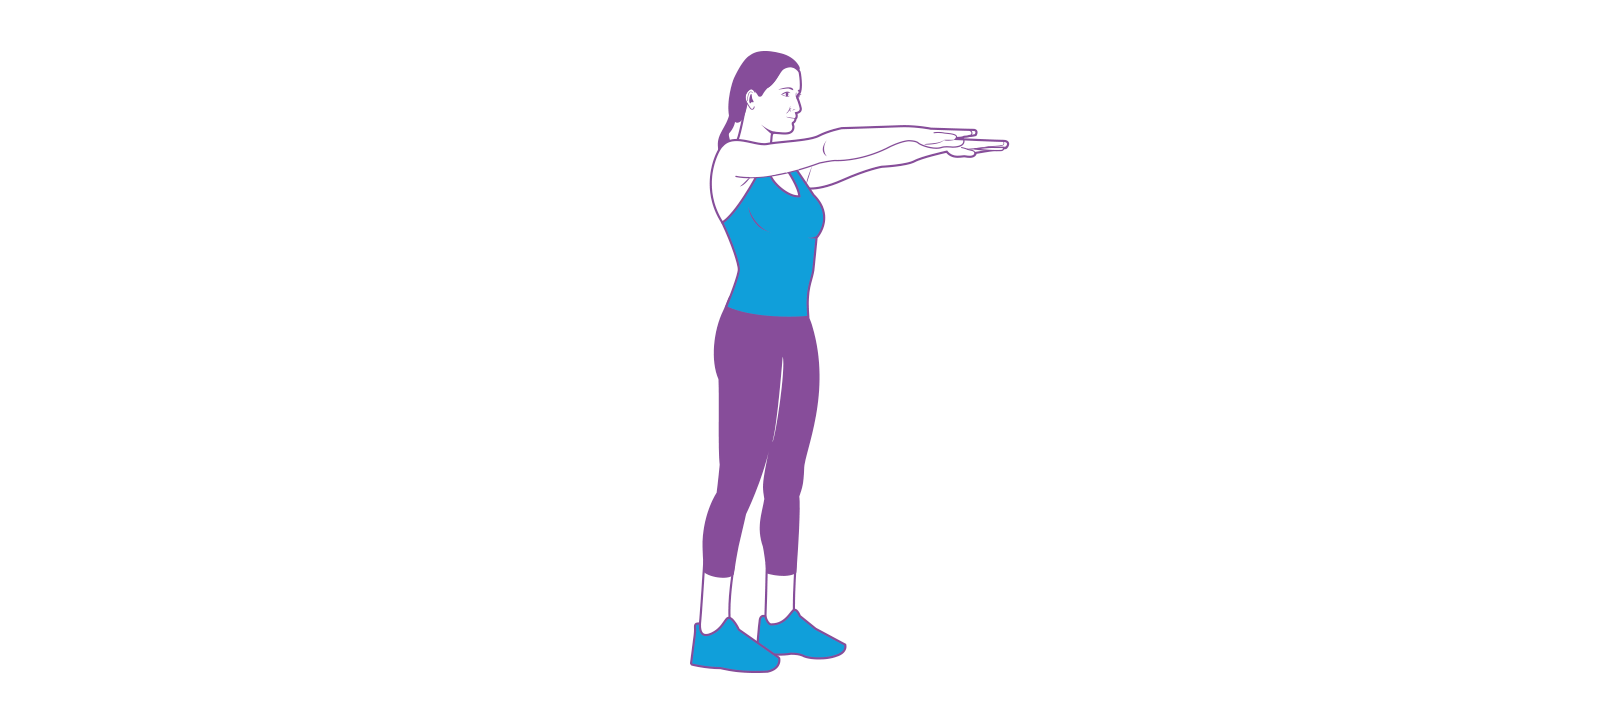 Animated illustration of woman doing squats